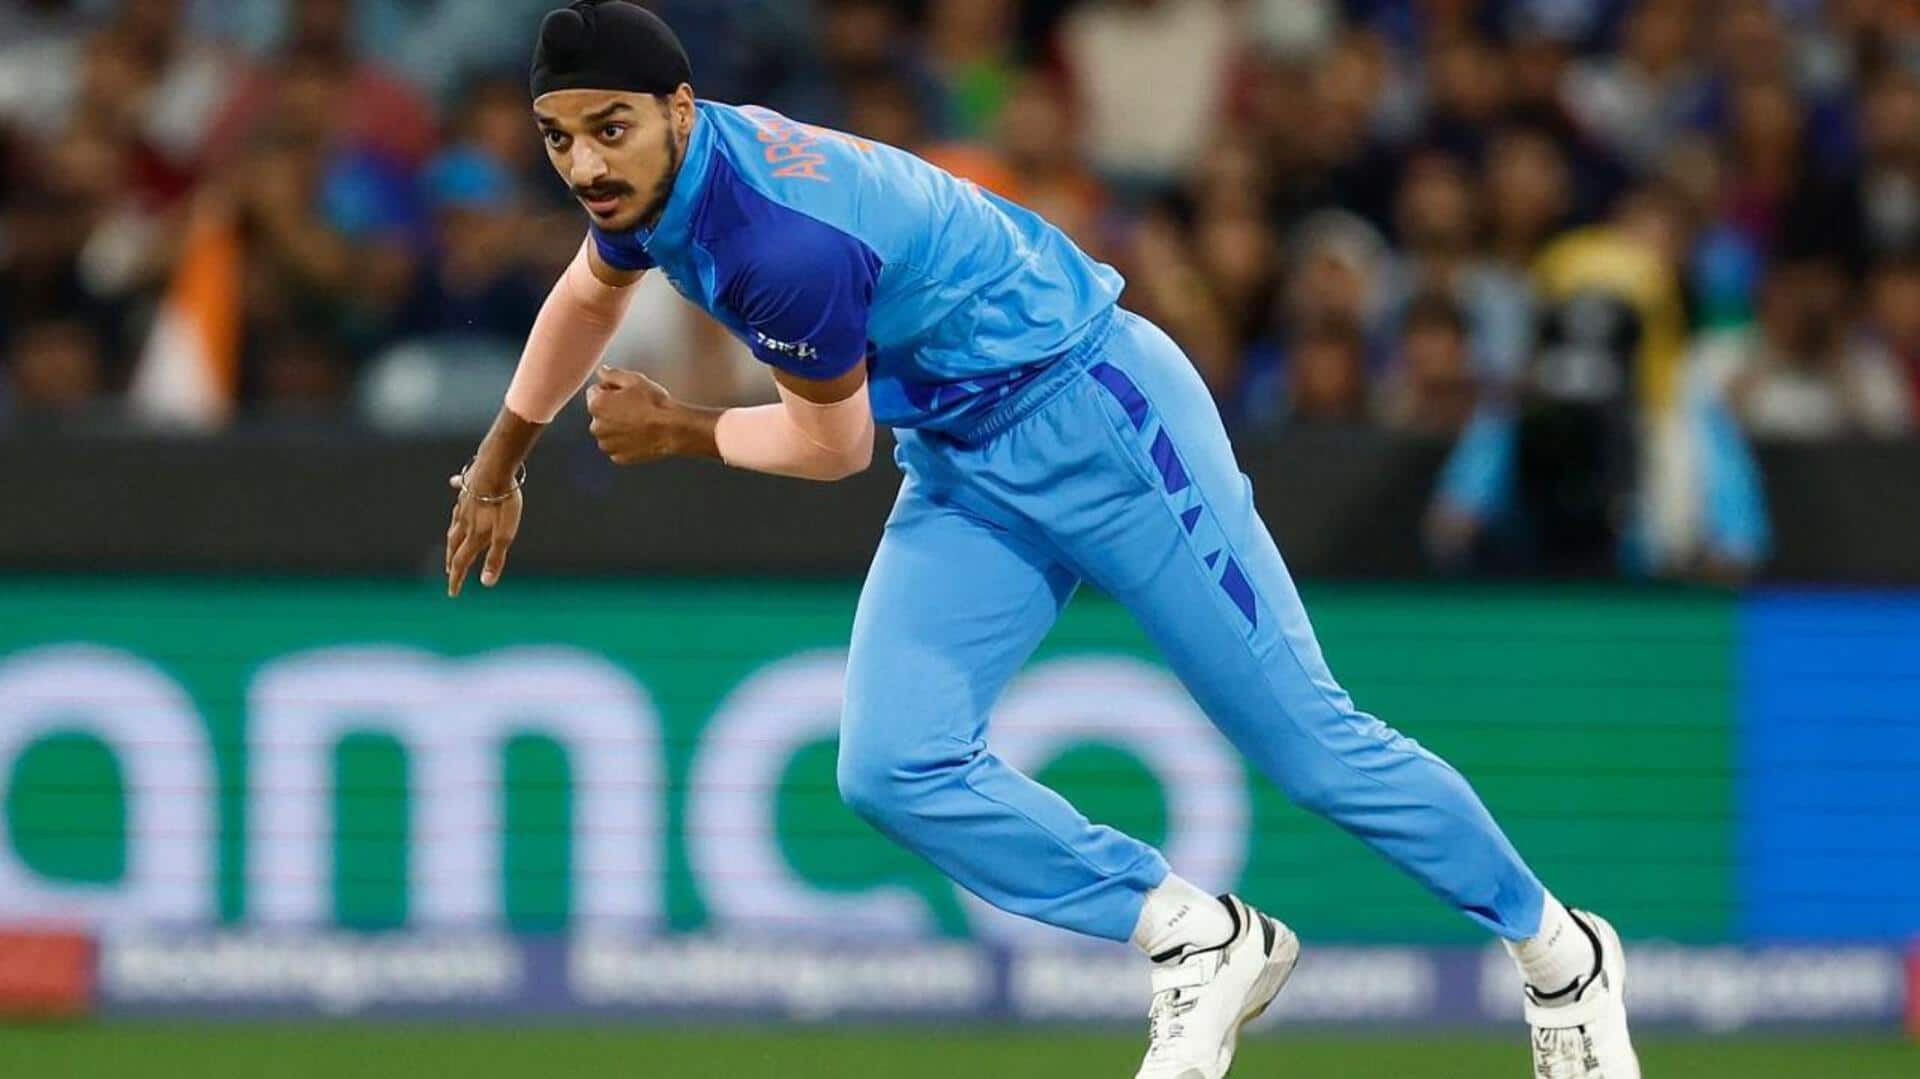 Arshdeep Singh owns third-best T20I average among pacers: Stats